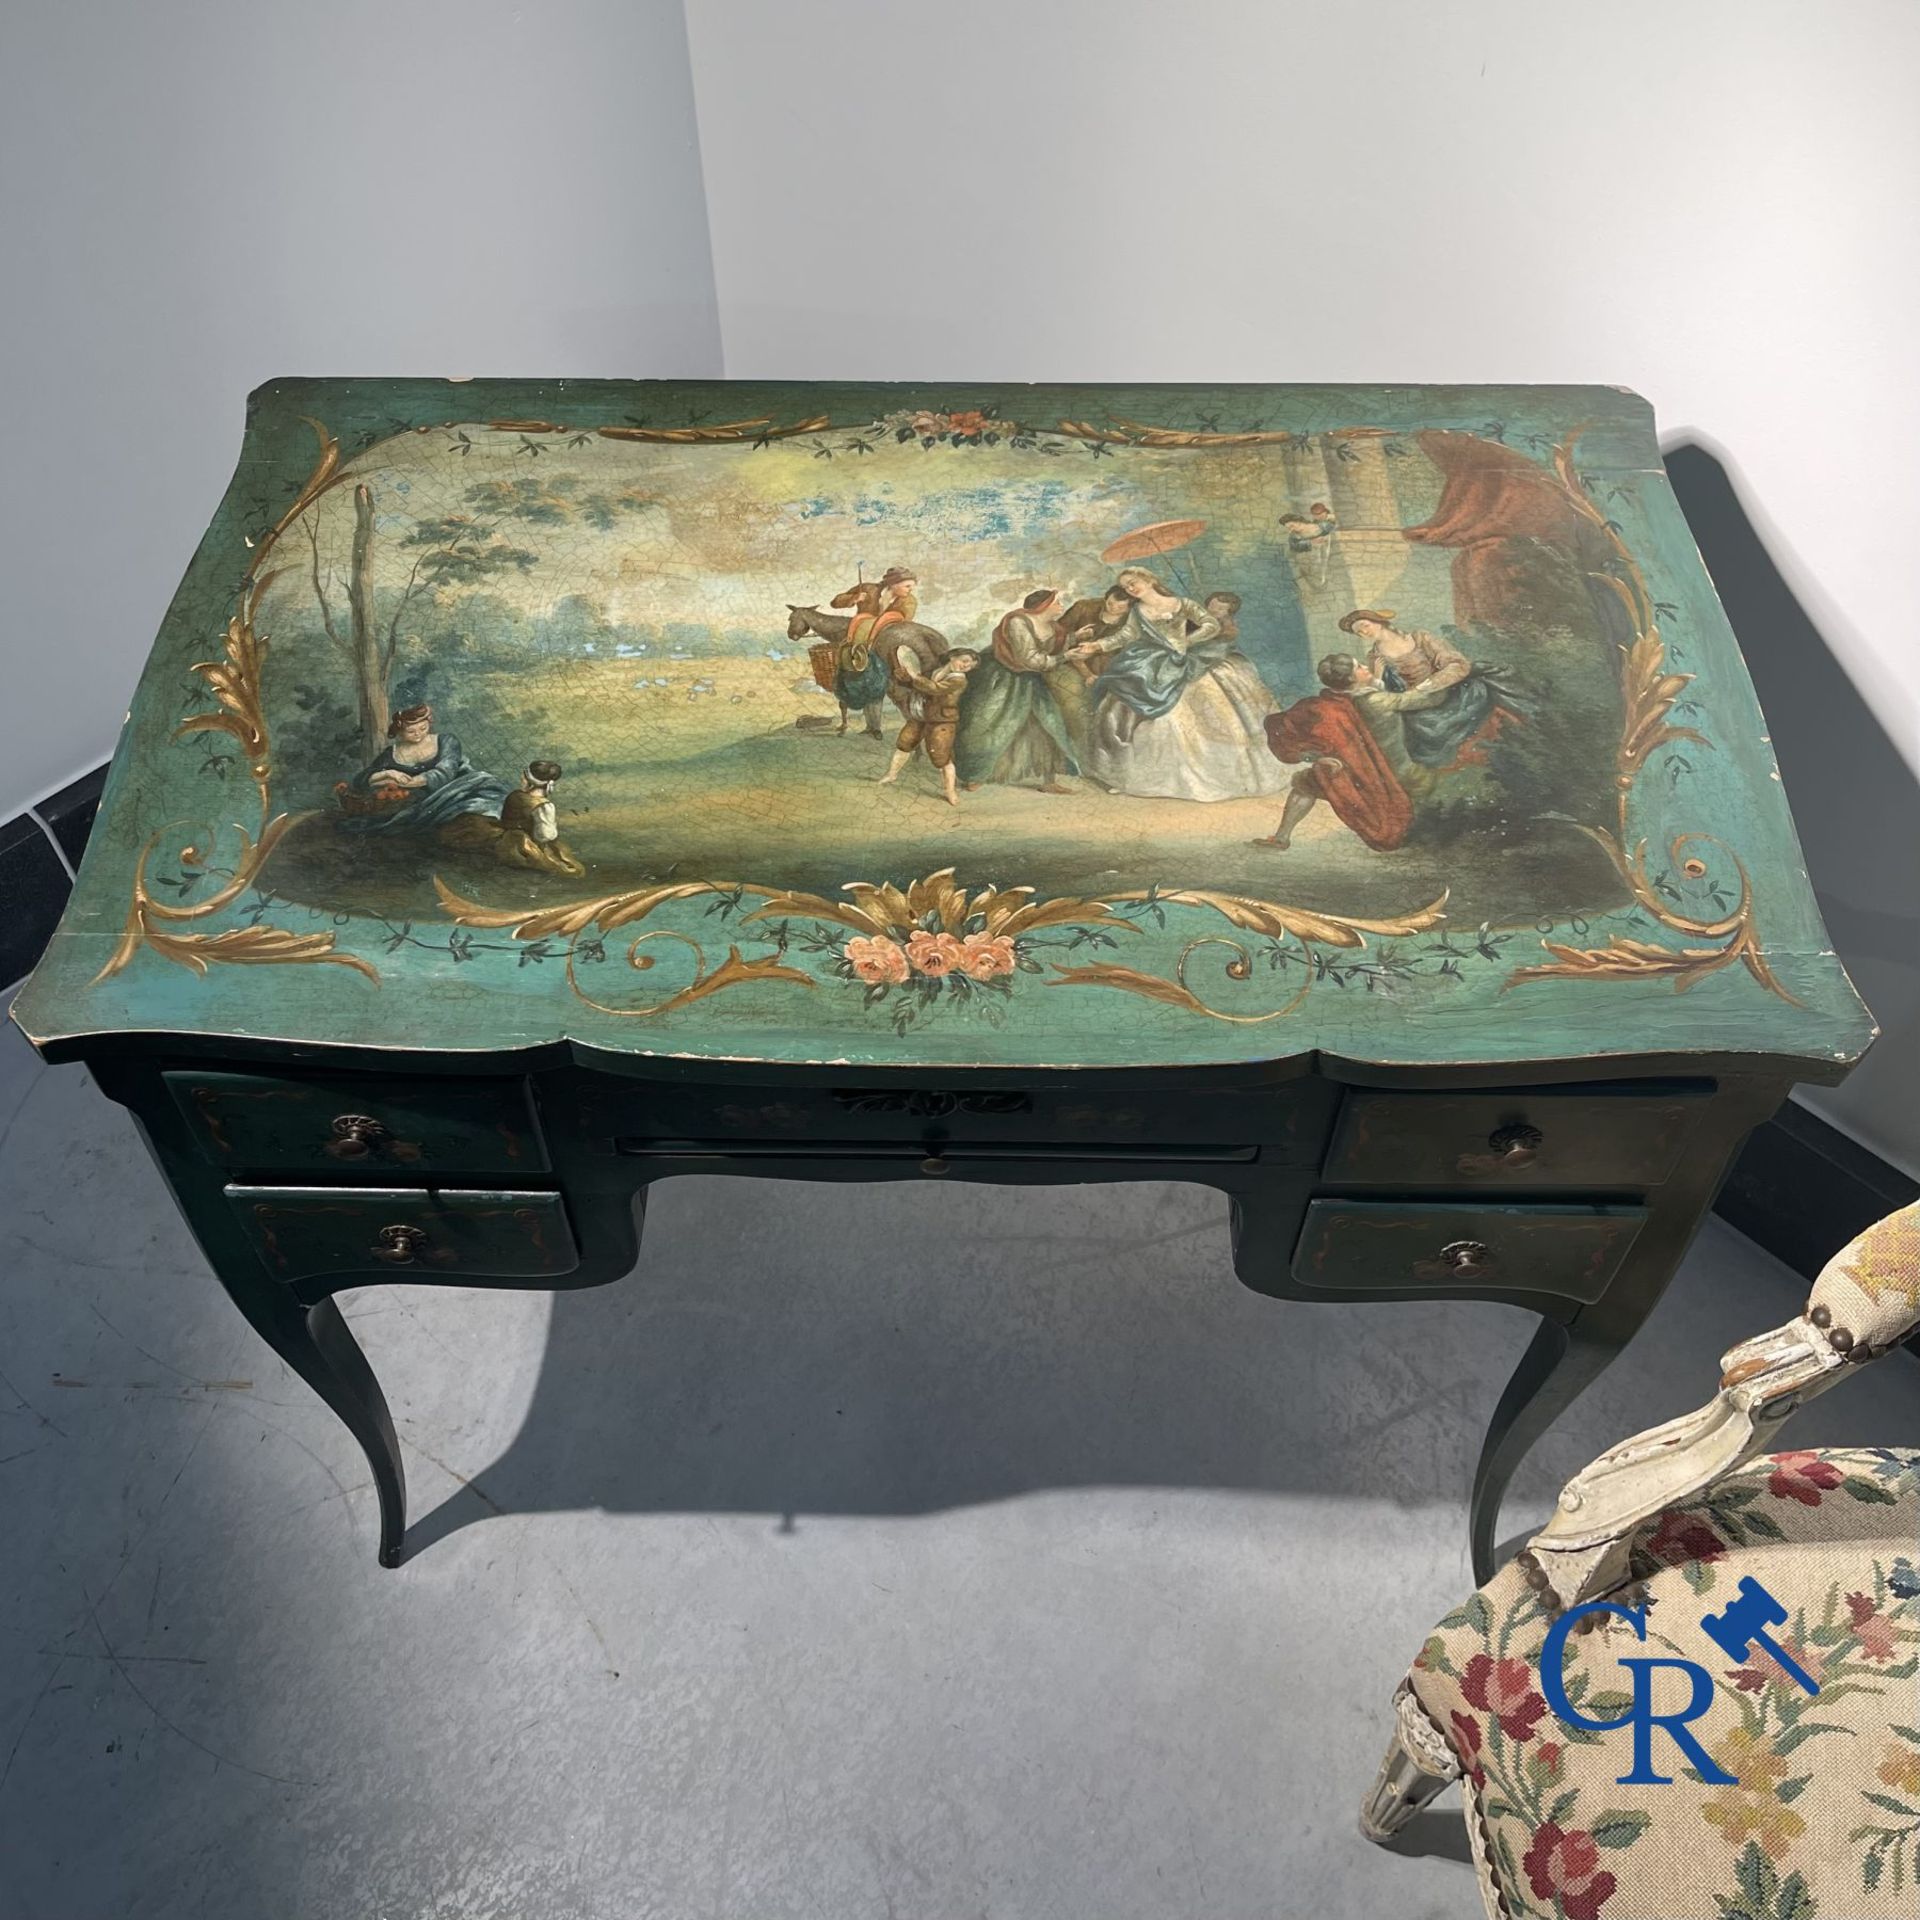 Ladies dressing table with gallant paintings, and a lacquered armchair transitional period Louis XV  - Image 2 of 17